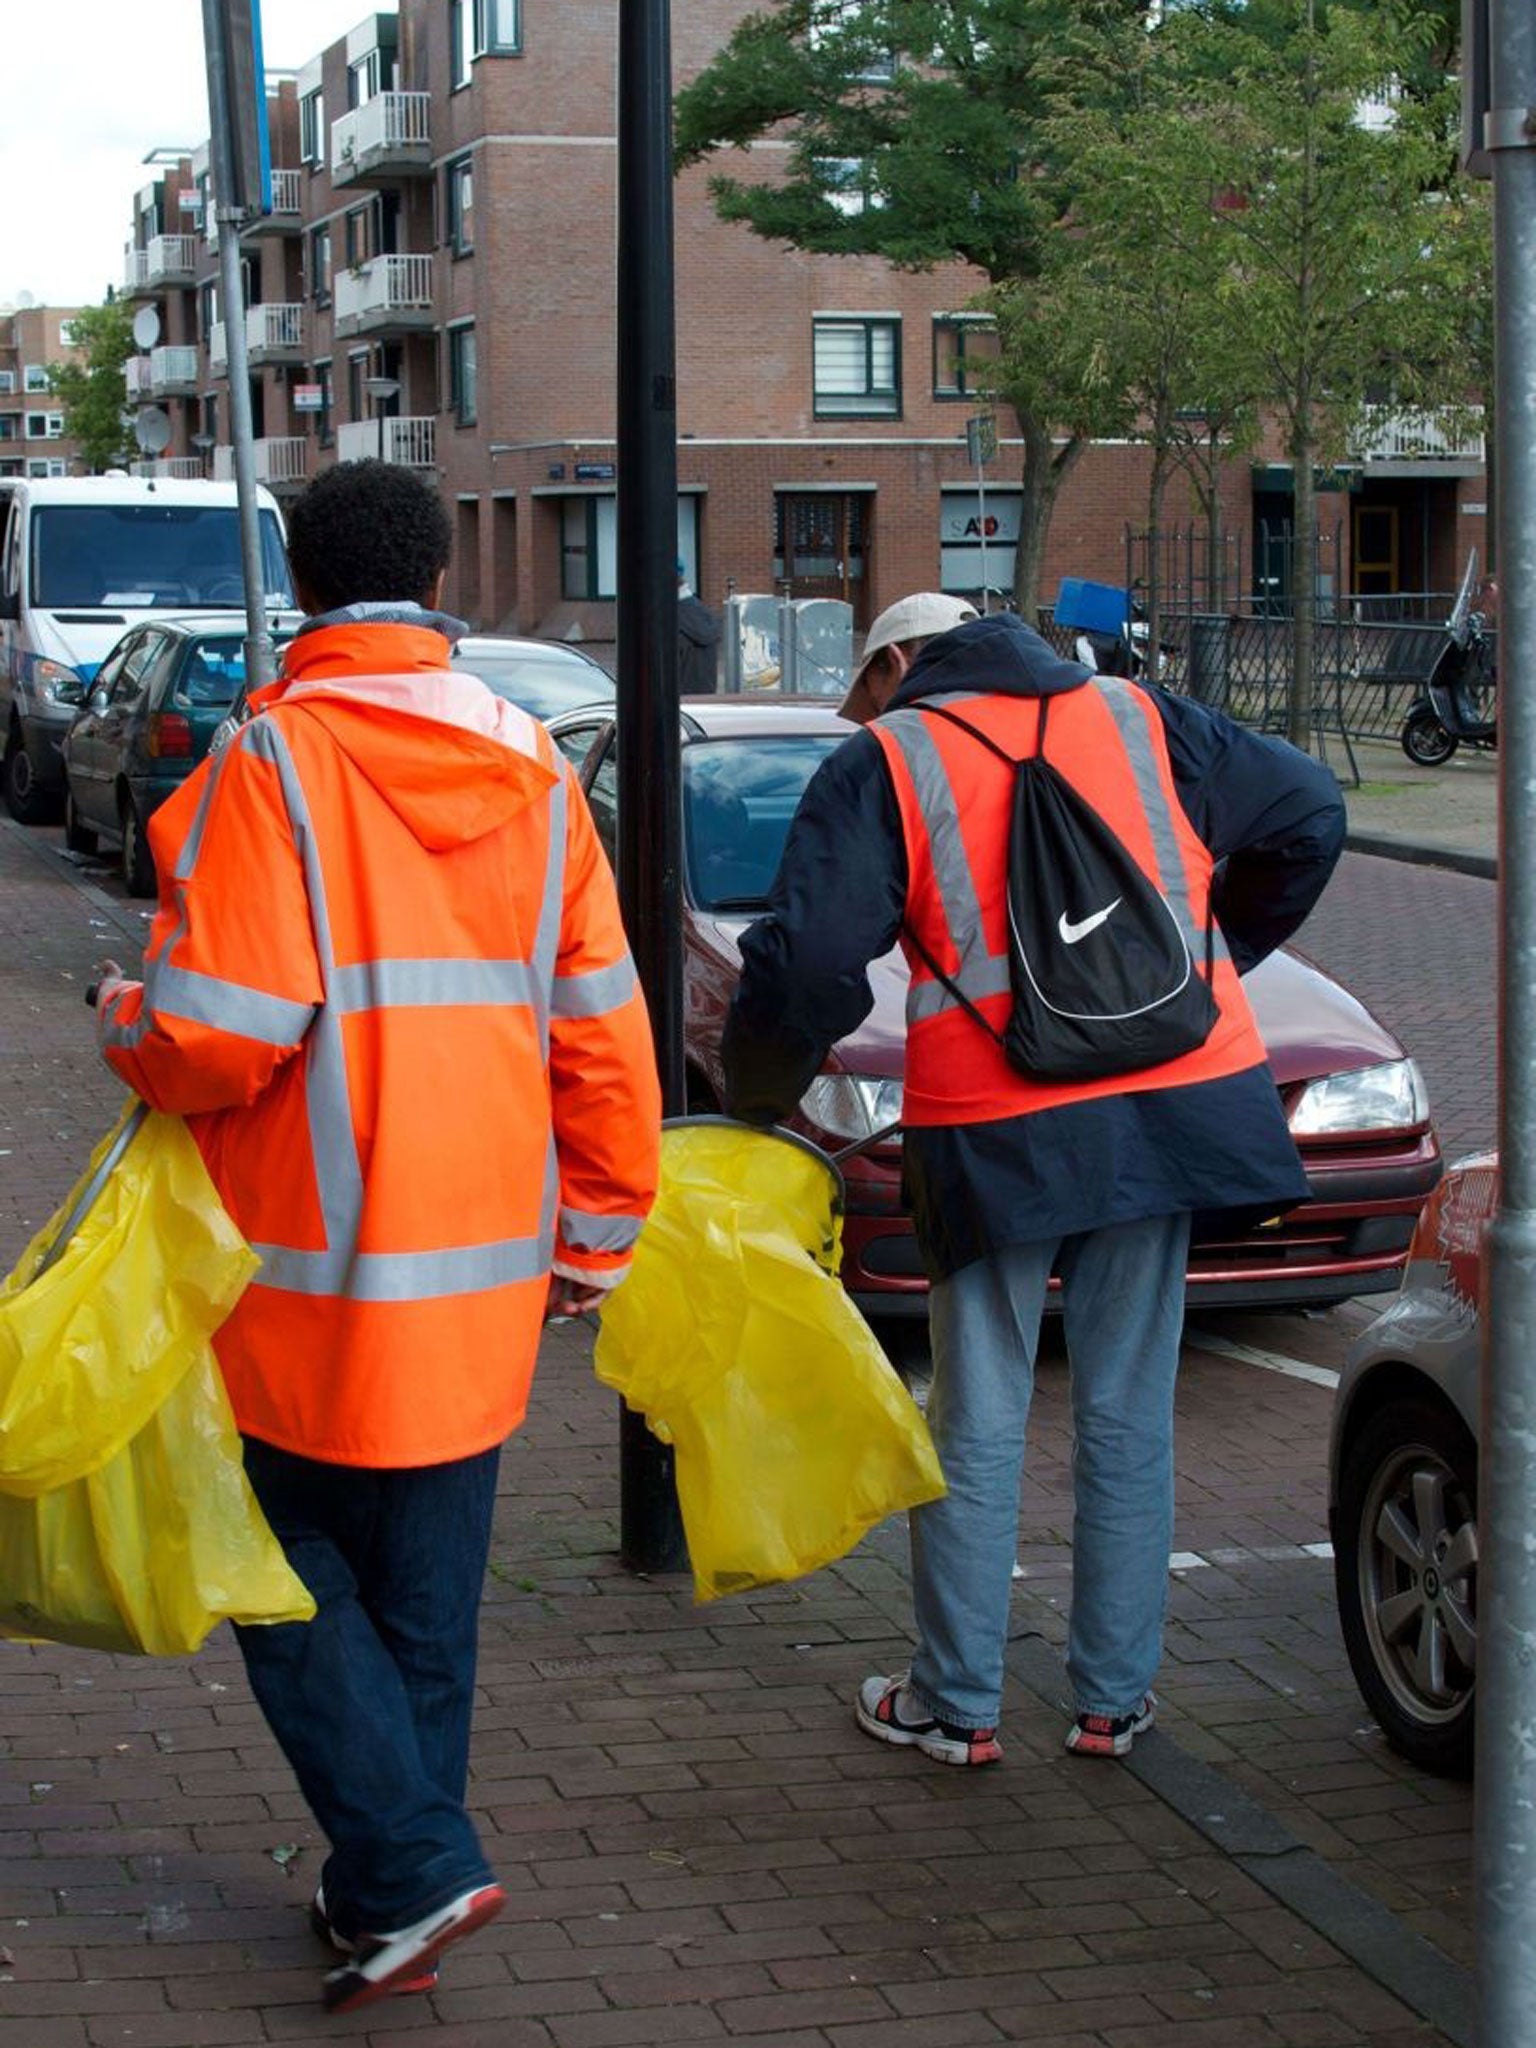 Chronic alcoholics clean a street in Amsterdam. The initiative of street cleaning in exchange for beer is sponsored by the De Regenboog (Rainbow) Foundation, mostly supported by donations and state subsidies